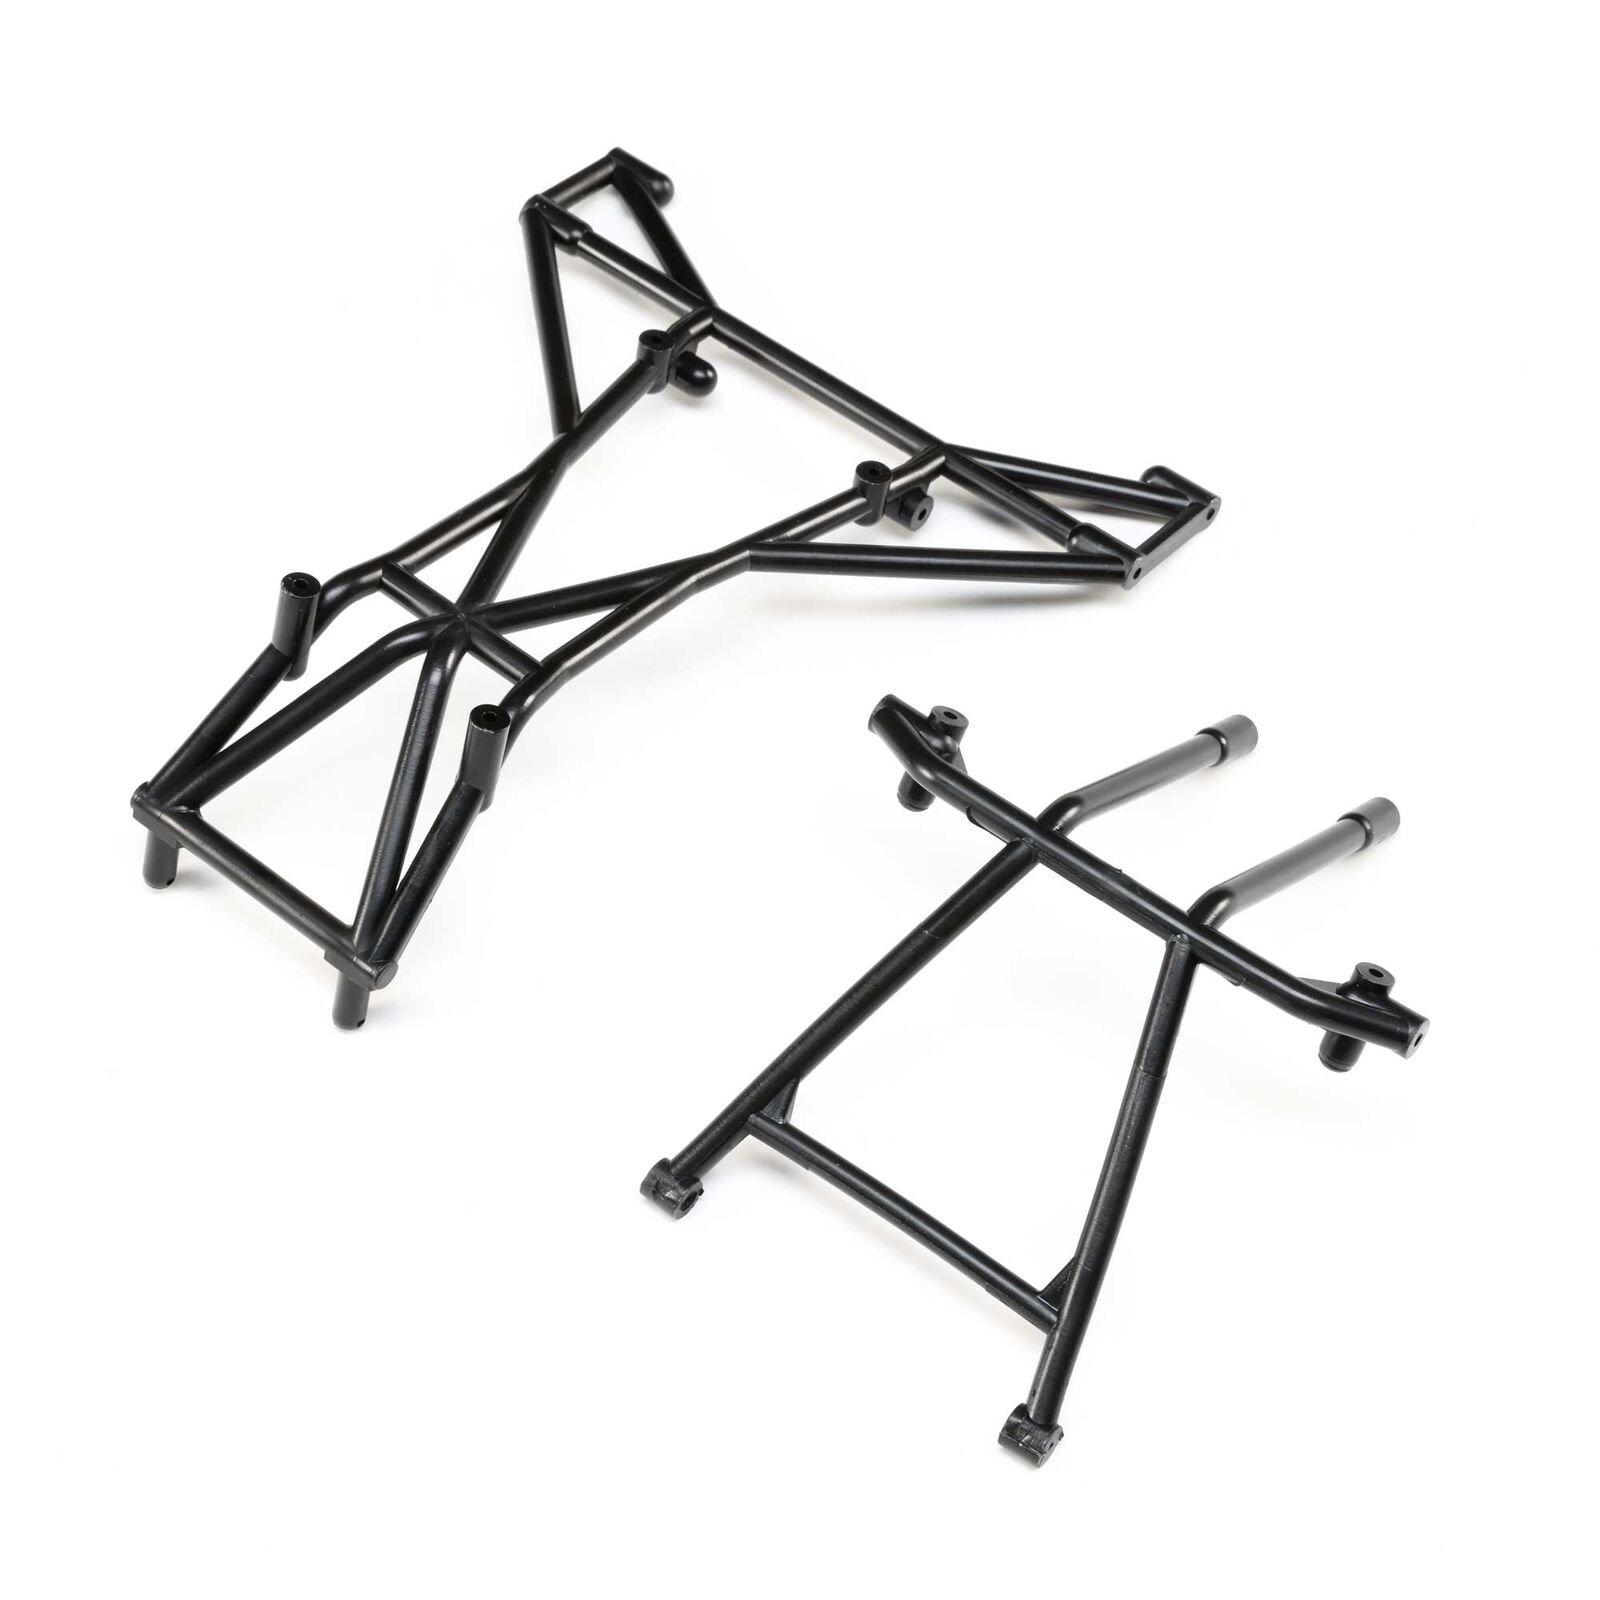 Top and Upper Cage Bars, Black: LMT